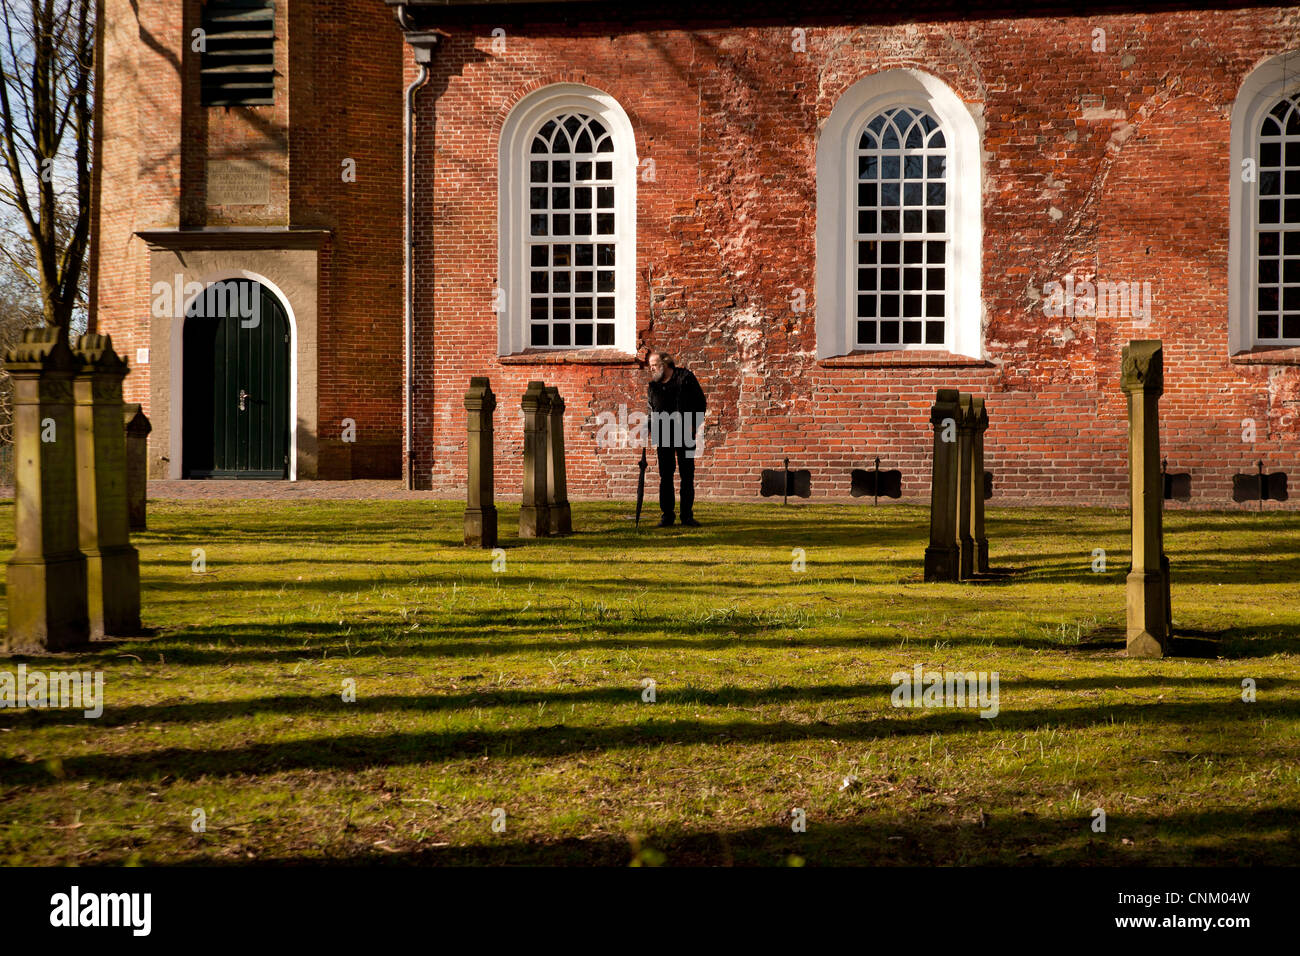 church Friedenskirche and cemetery in Leer , East Frisia, Lower Saxony, Germany Stock Photo